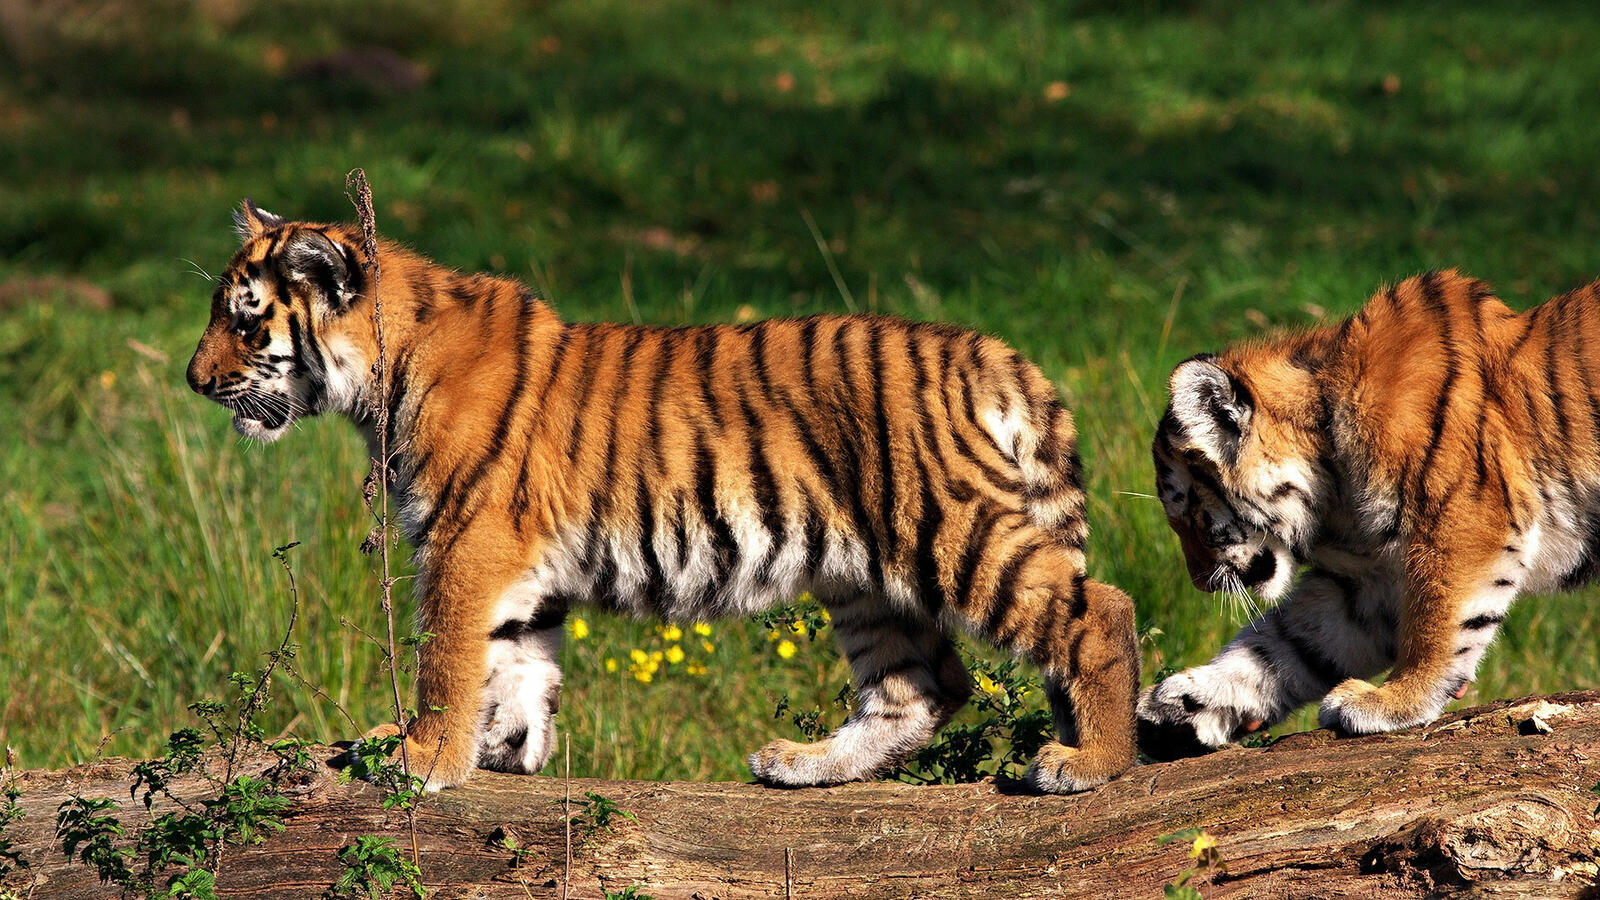 Wallpapers tigers tiger cubs kittens on the desktop